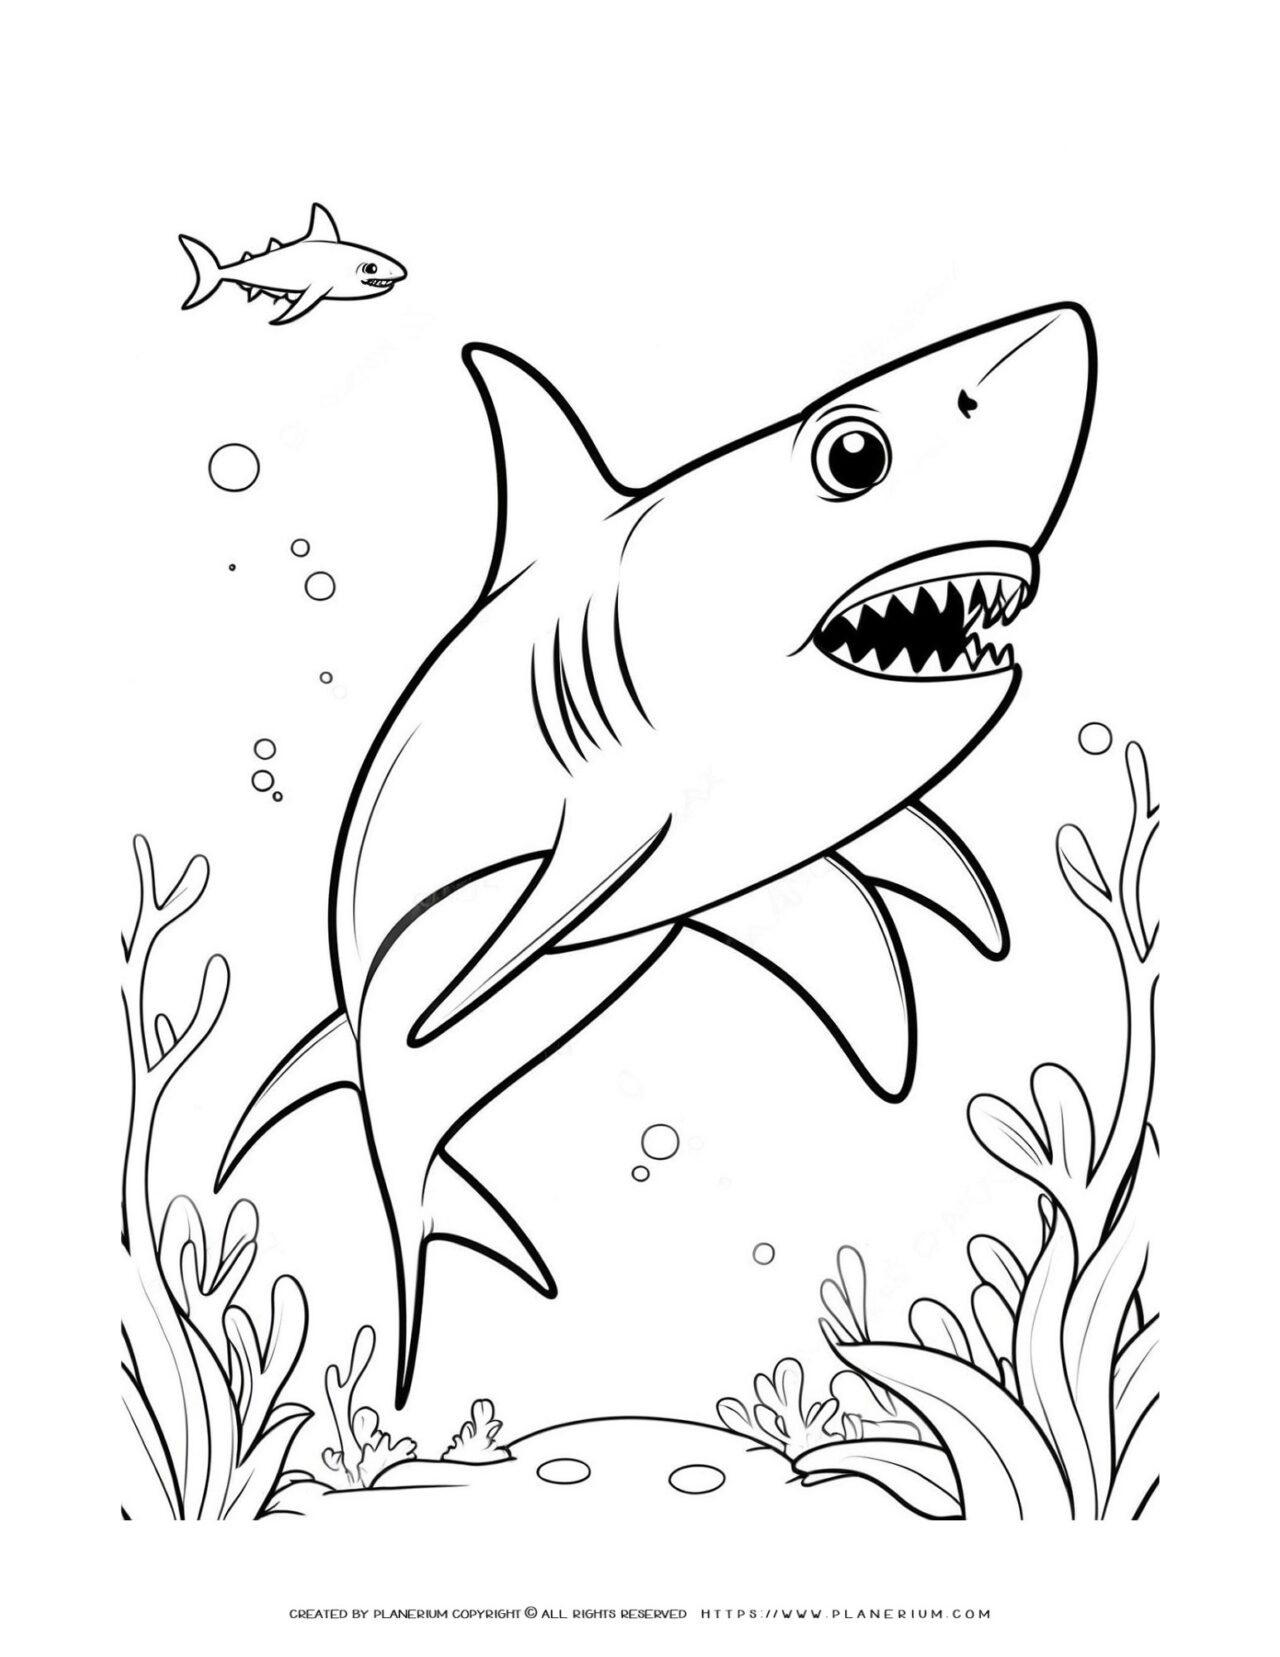 Shark-and-fish-coloring-page-for-kids-underwater